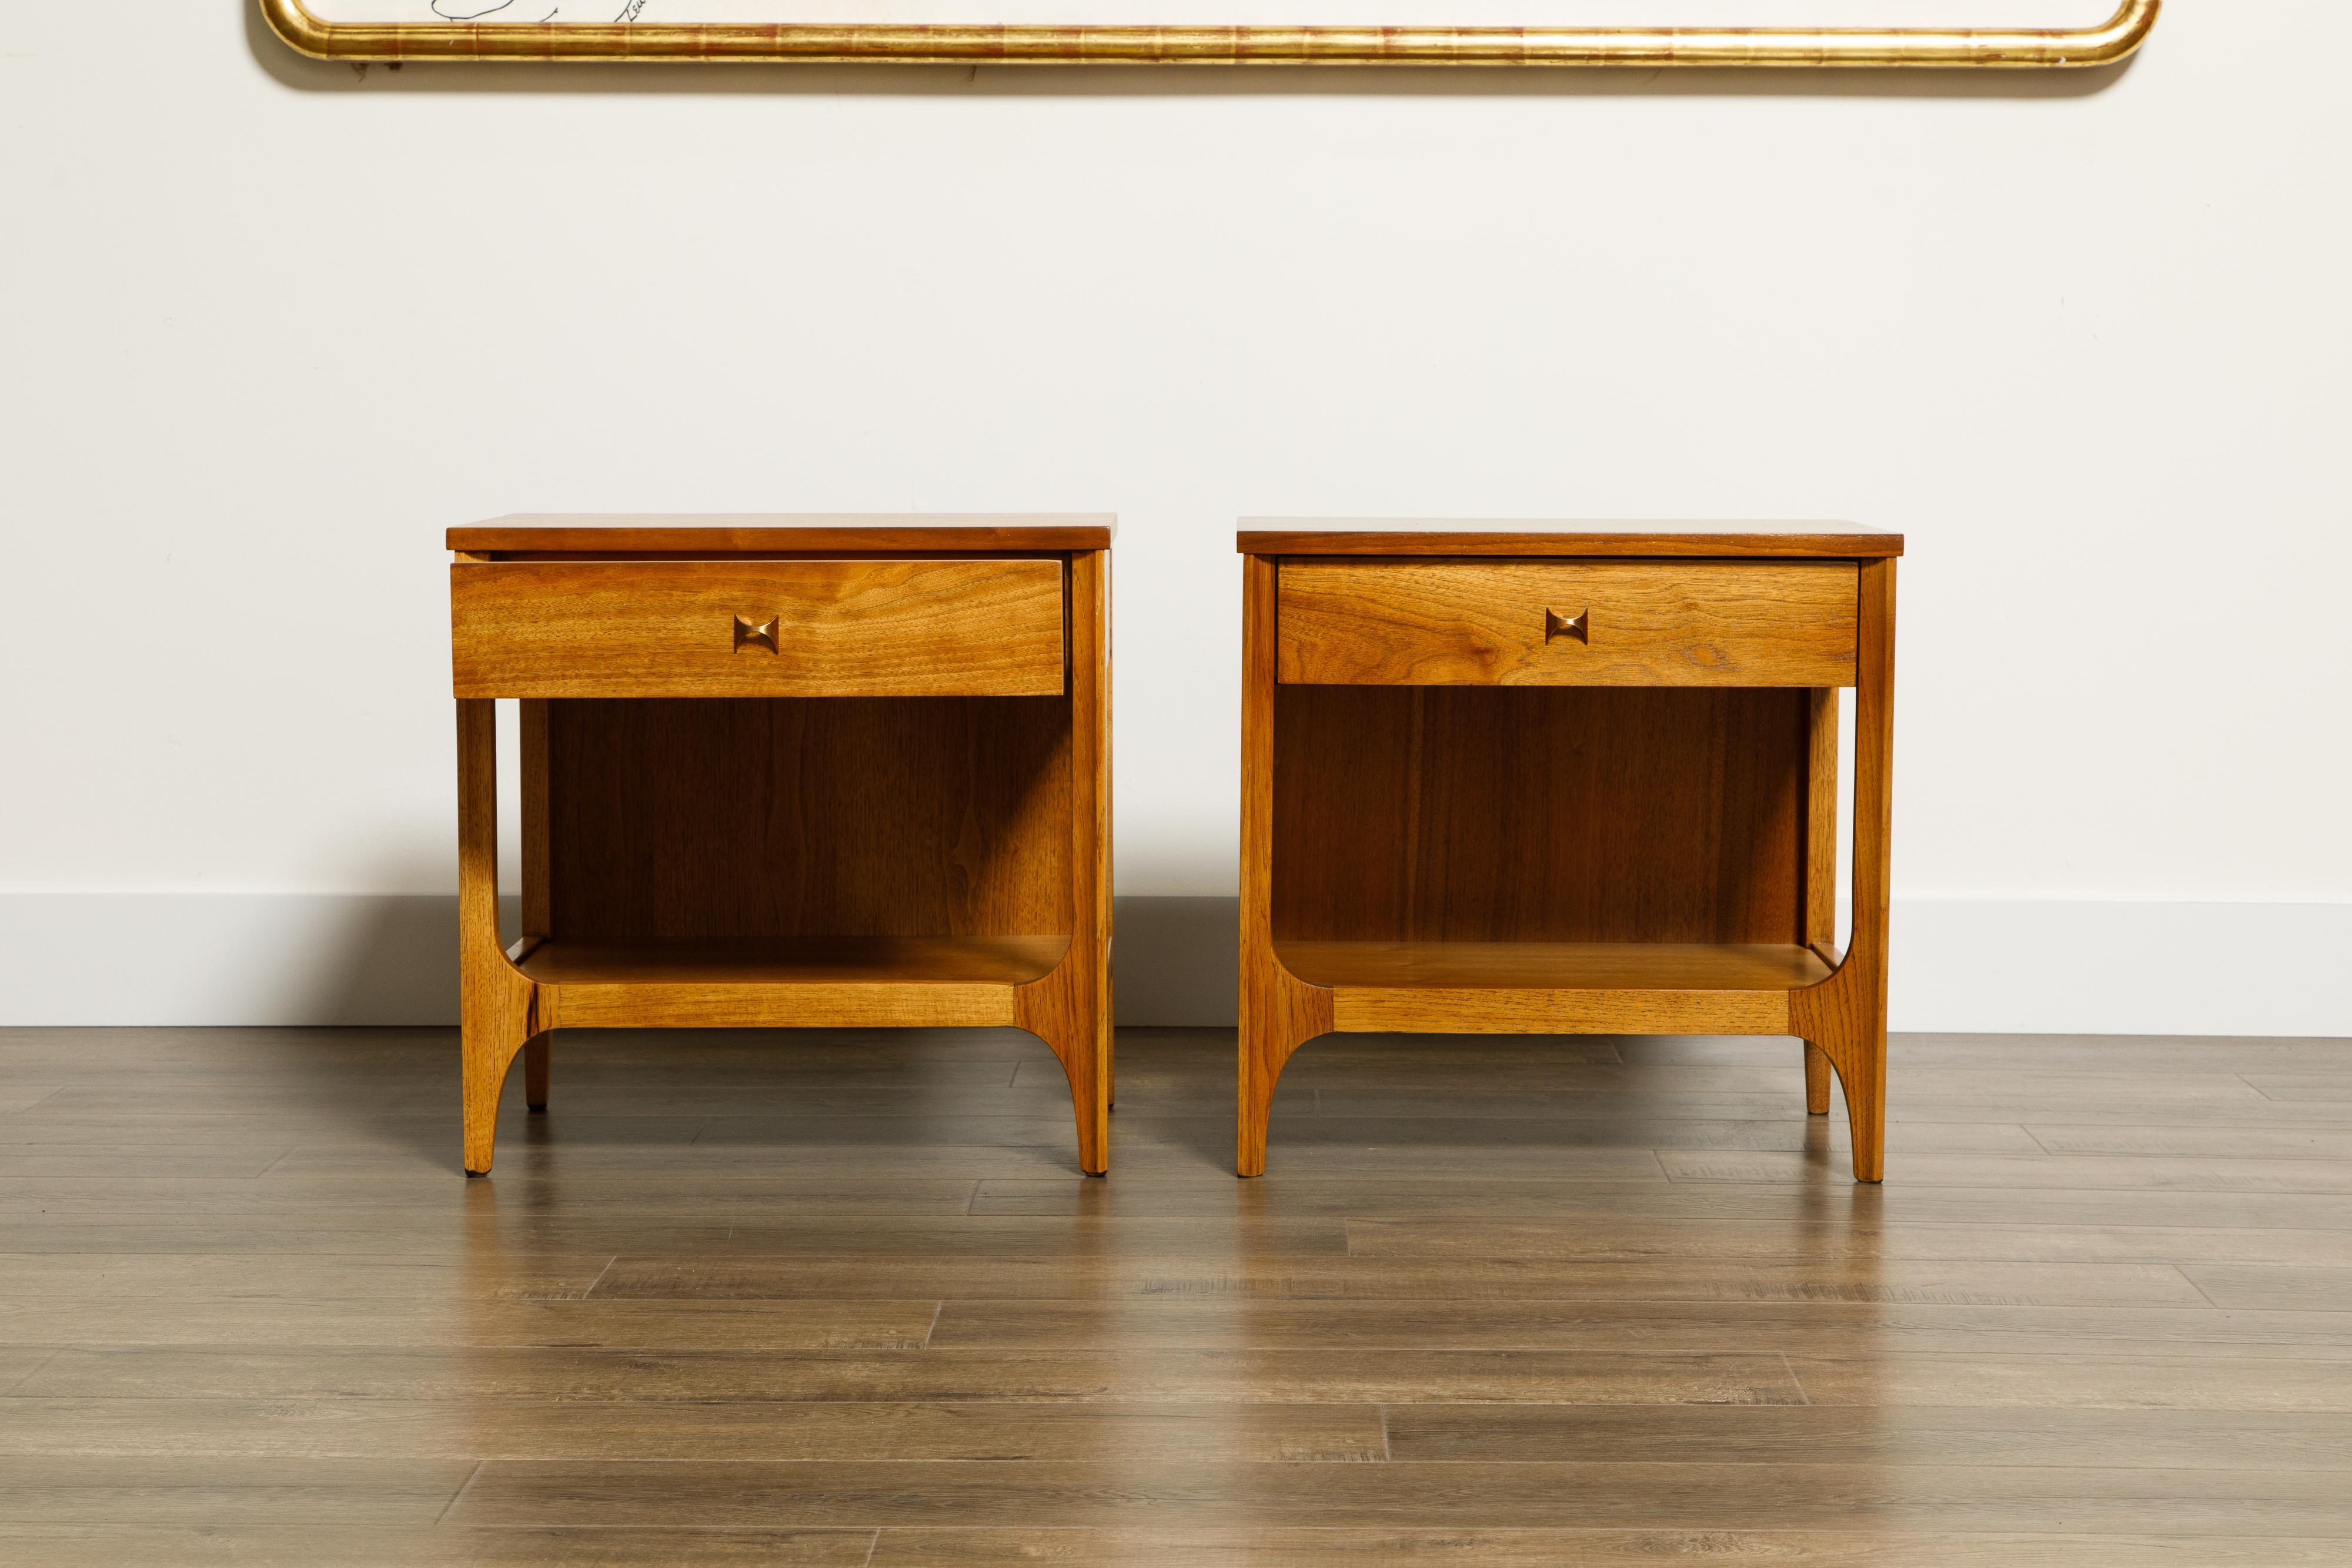 American Pair of 'Brasilia' Bedside Tables by Broyhill Premiere, Refinished, 1960s